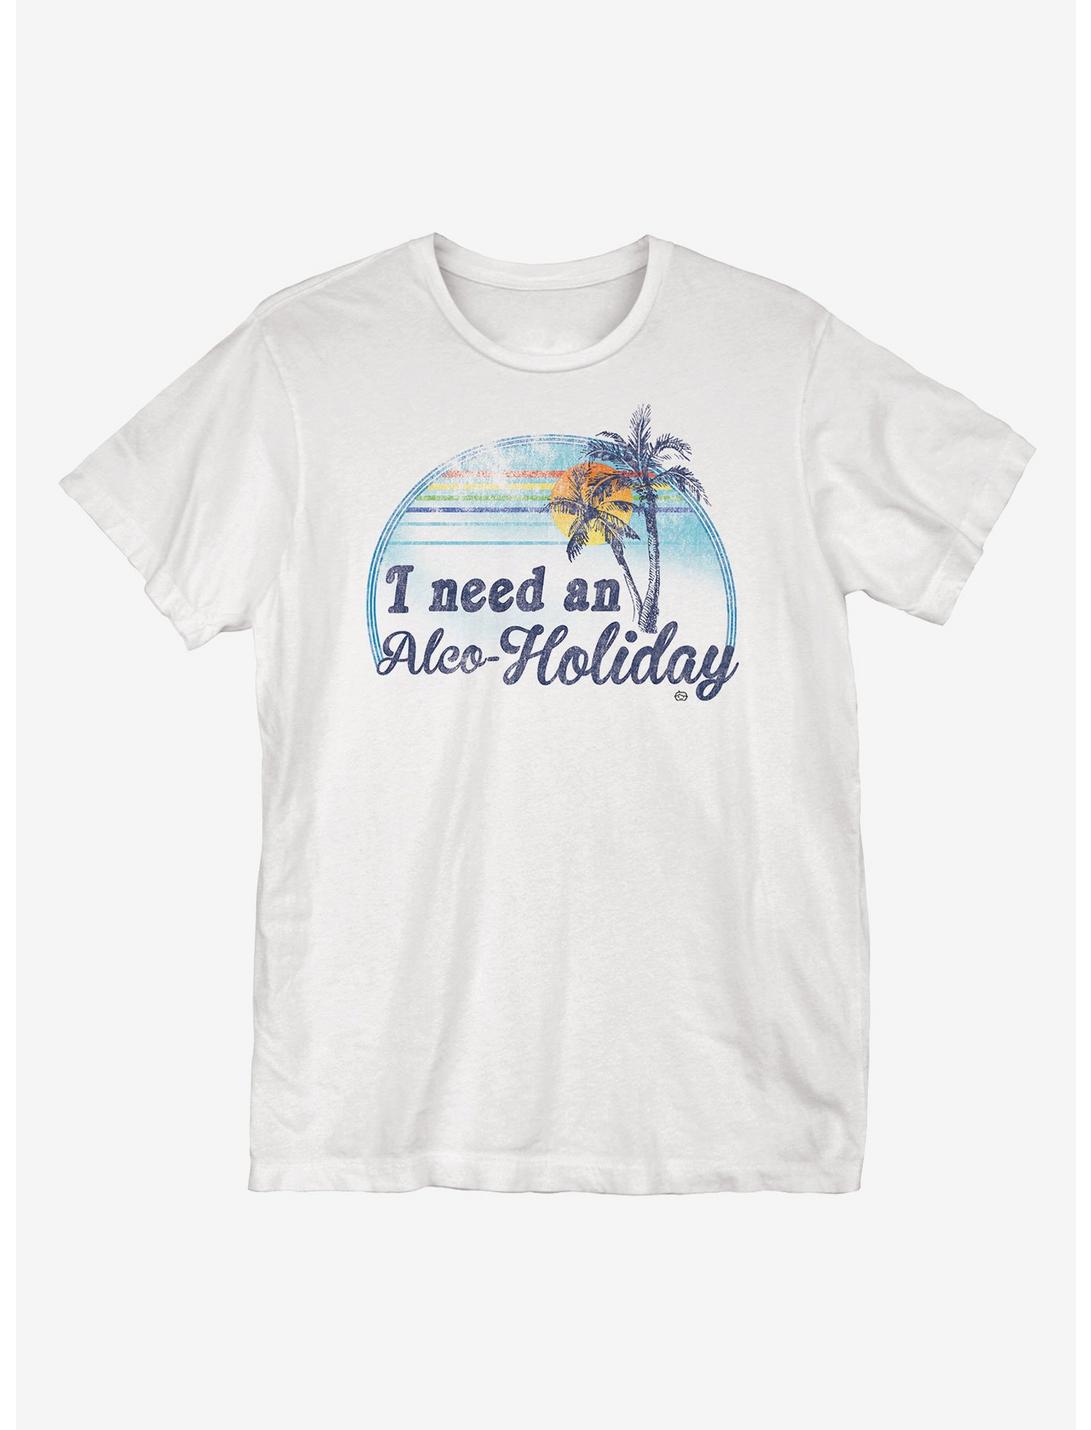 Alcoholiday T-Shirt, WHITE, hi-res